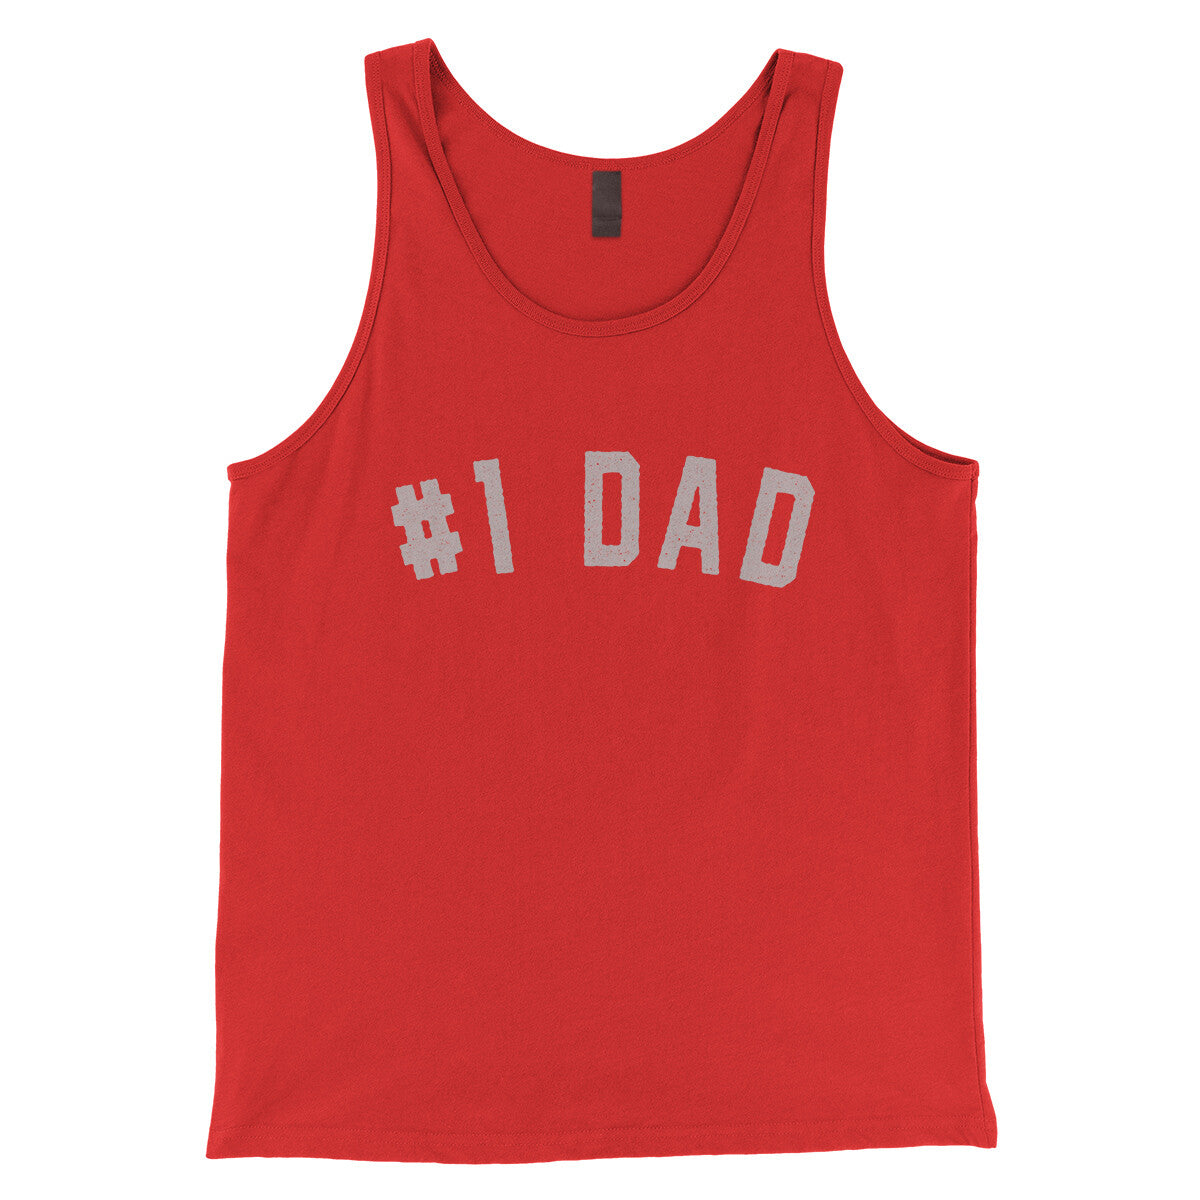 Number 1 Dad in Red Color